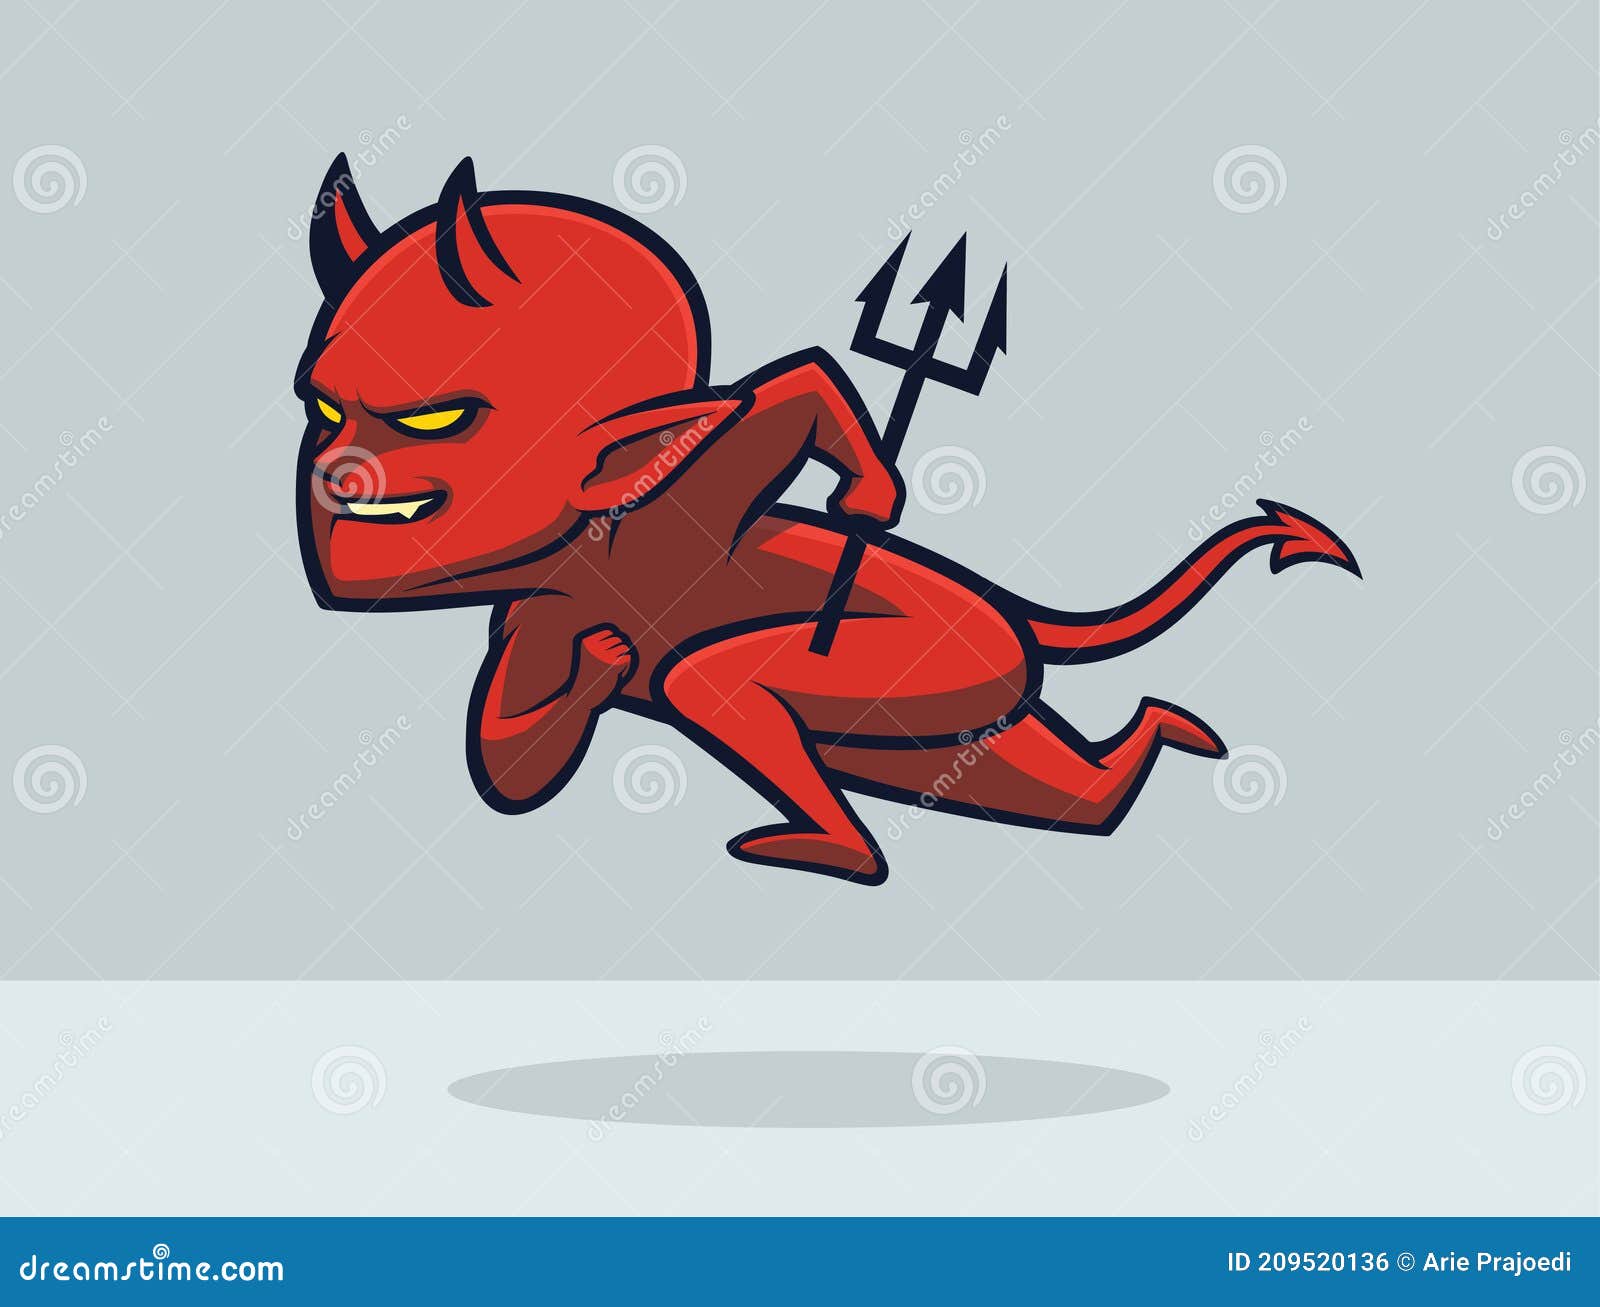 Devil clipart scary, Devil scary Transparent FREE for download on ...